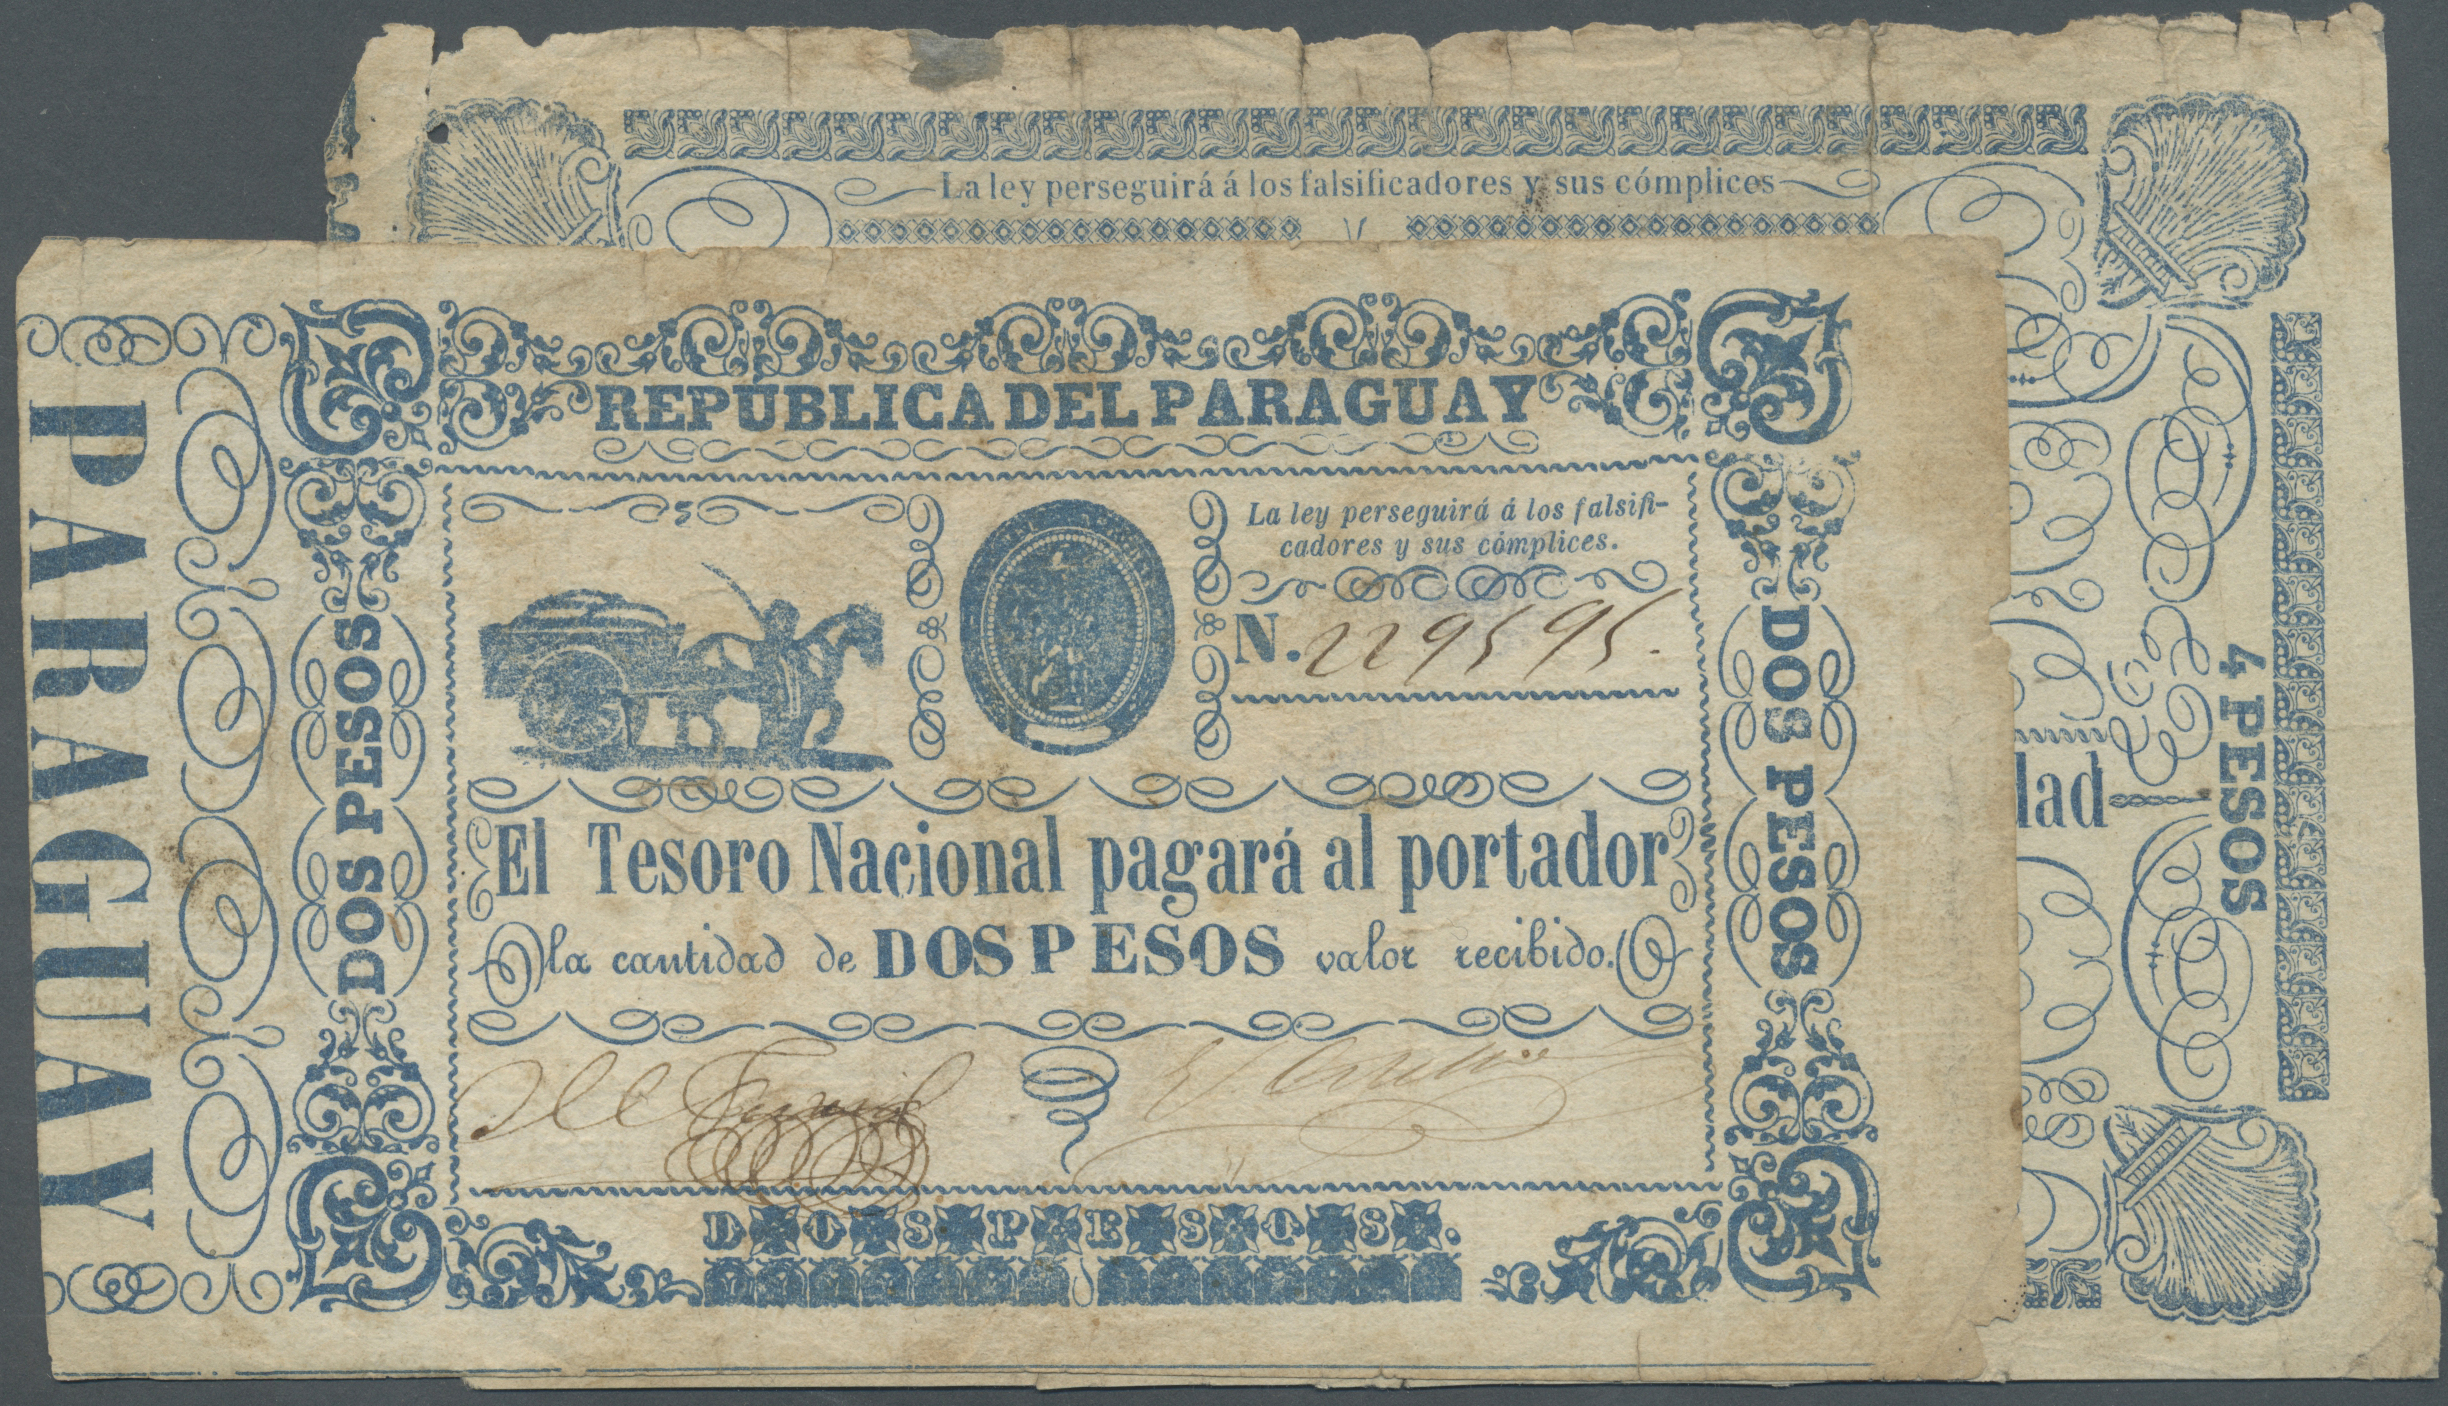 Lot 334 - Paraguay | Banknoten  -  Auktionshaus Christoph Gärtner GmbH & Co. KG 52nd Auction - Day 1